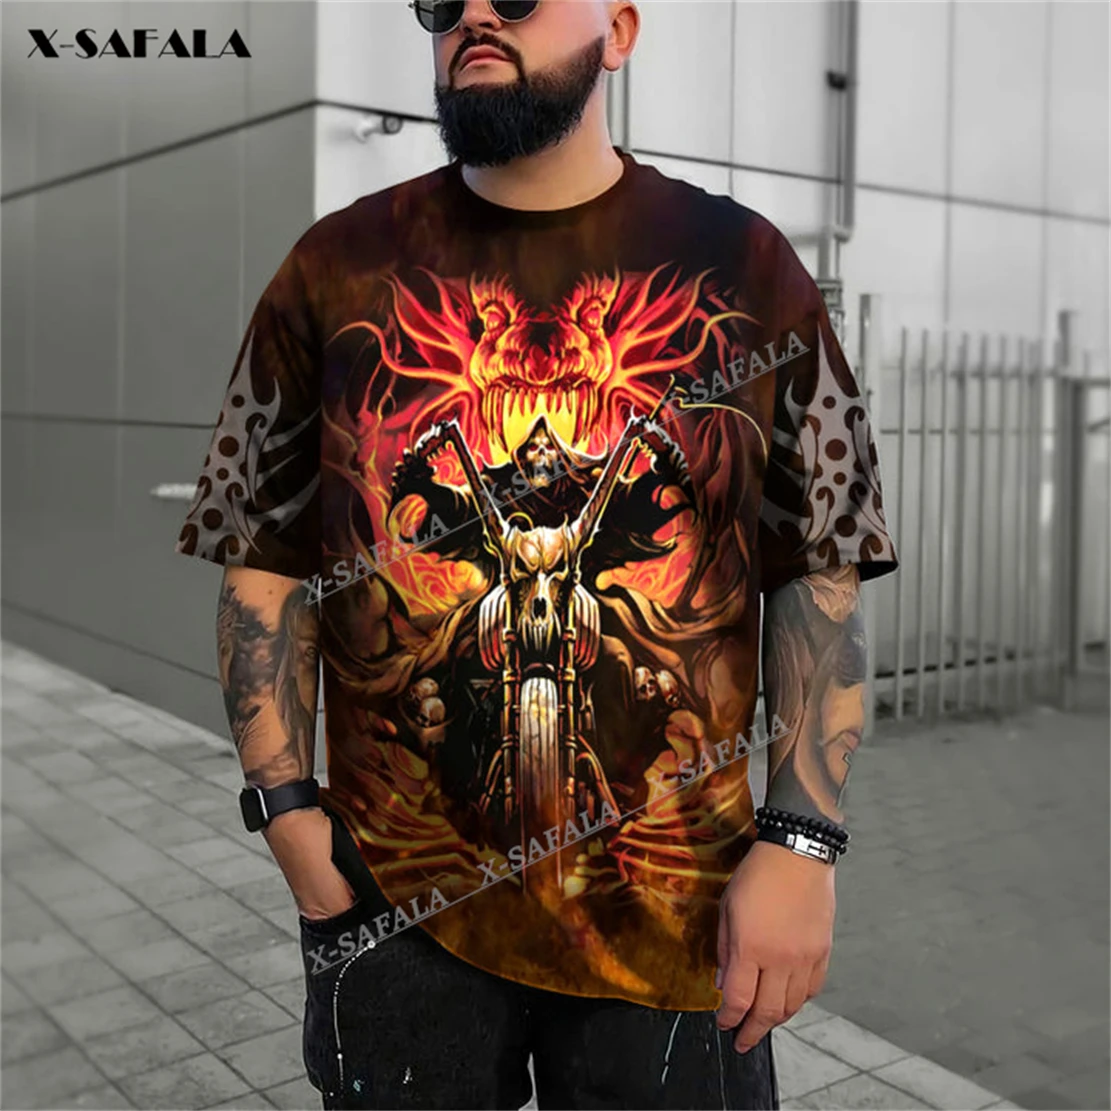 

Grim Reaper Ghost Rider Fire Skull 3D Printed T-Shirts Tops Tees Short Sleeve Casual Milk Fibe Better Cotton O Collared Summer